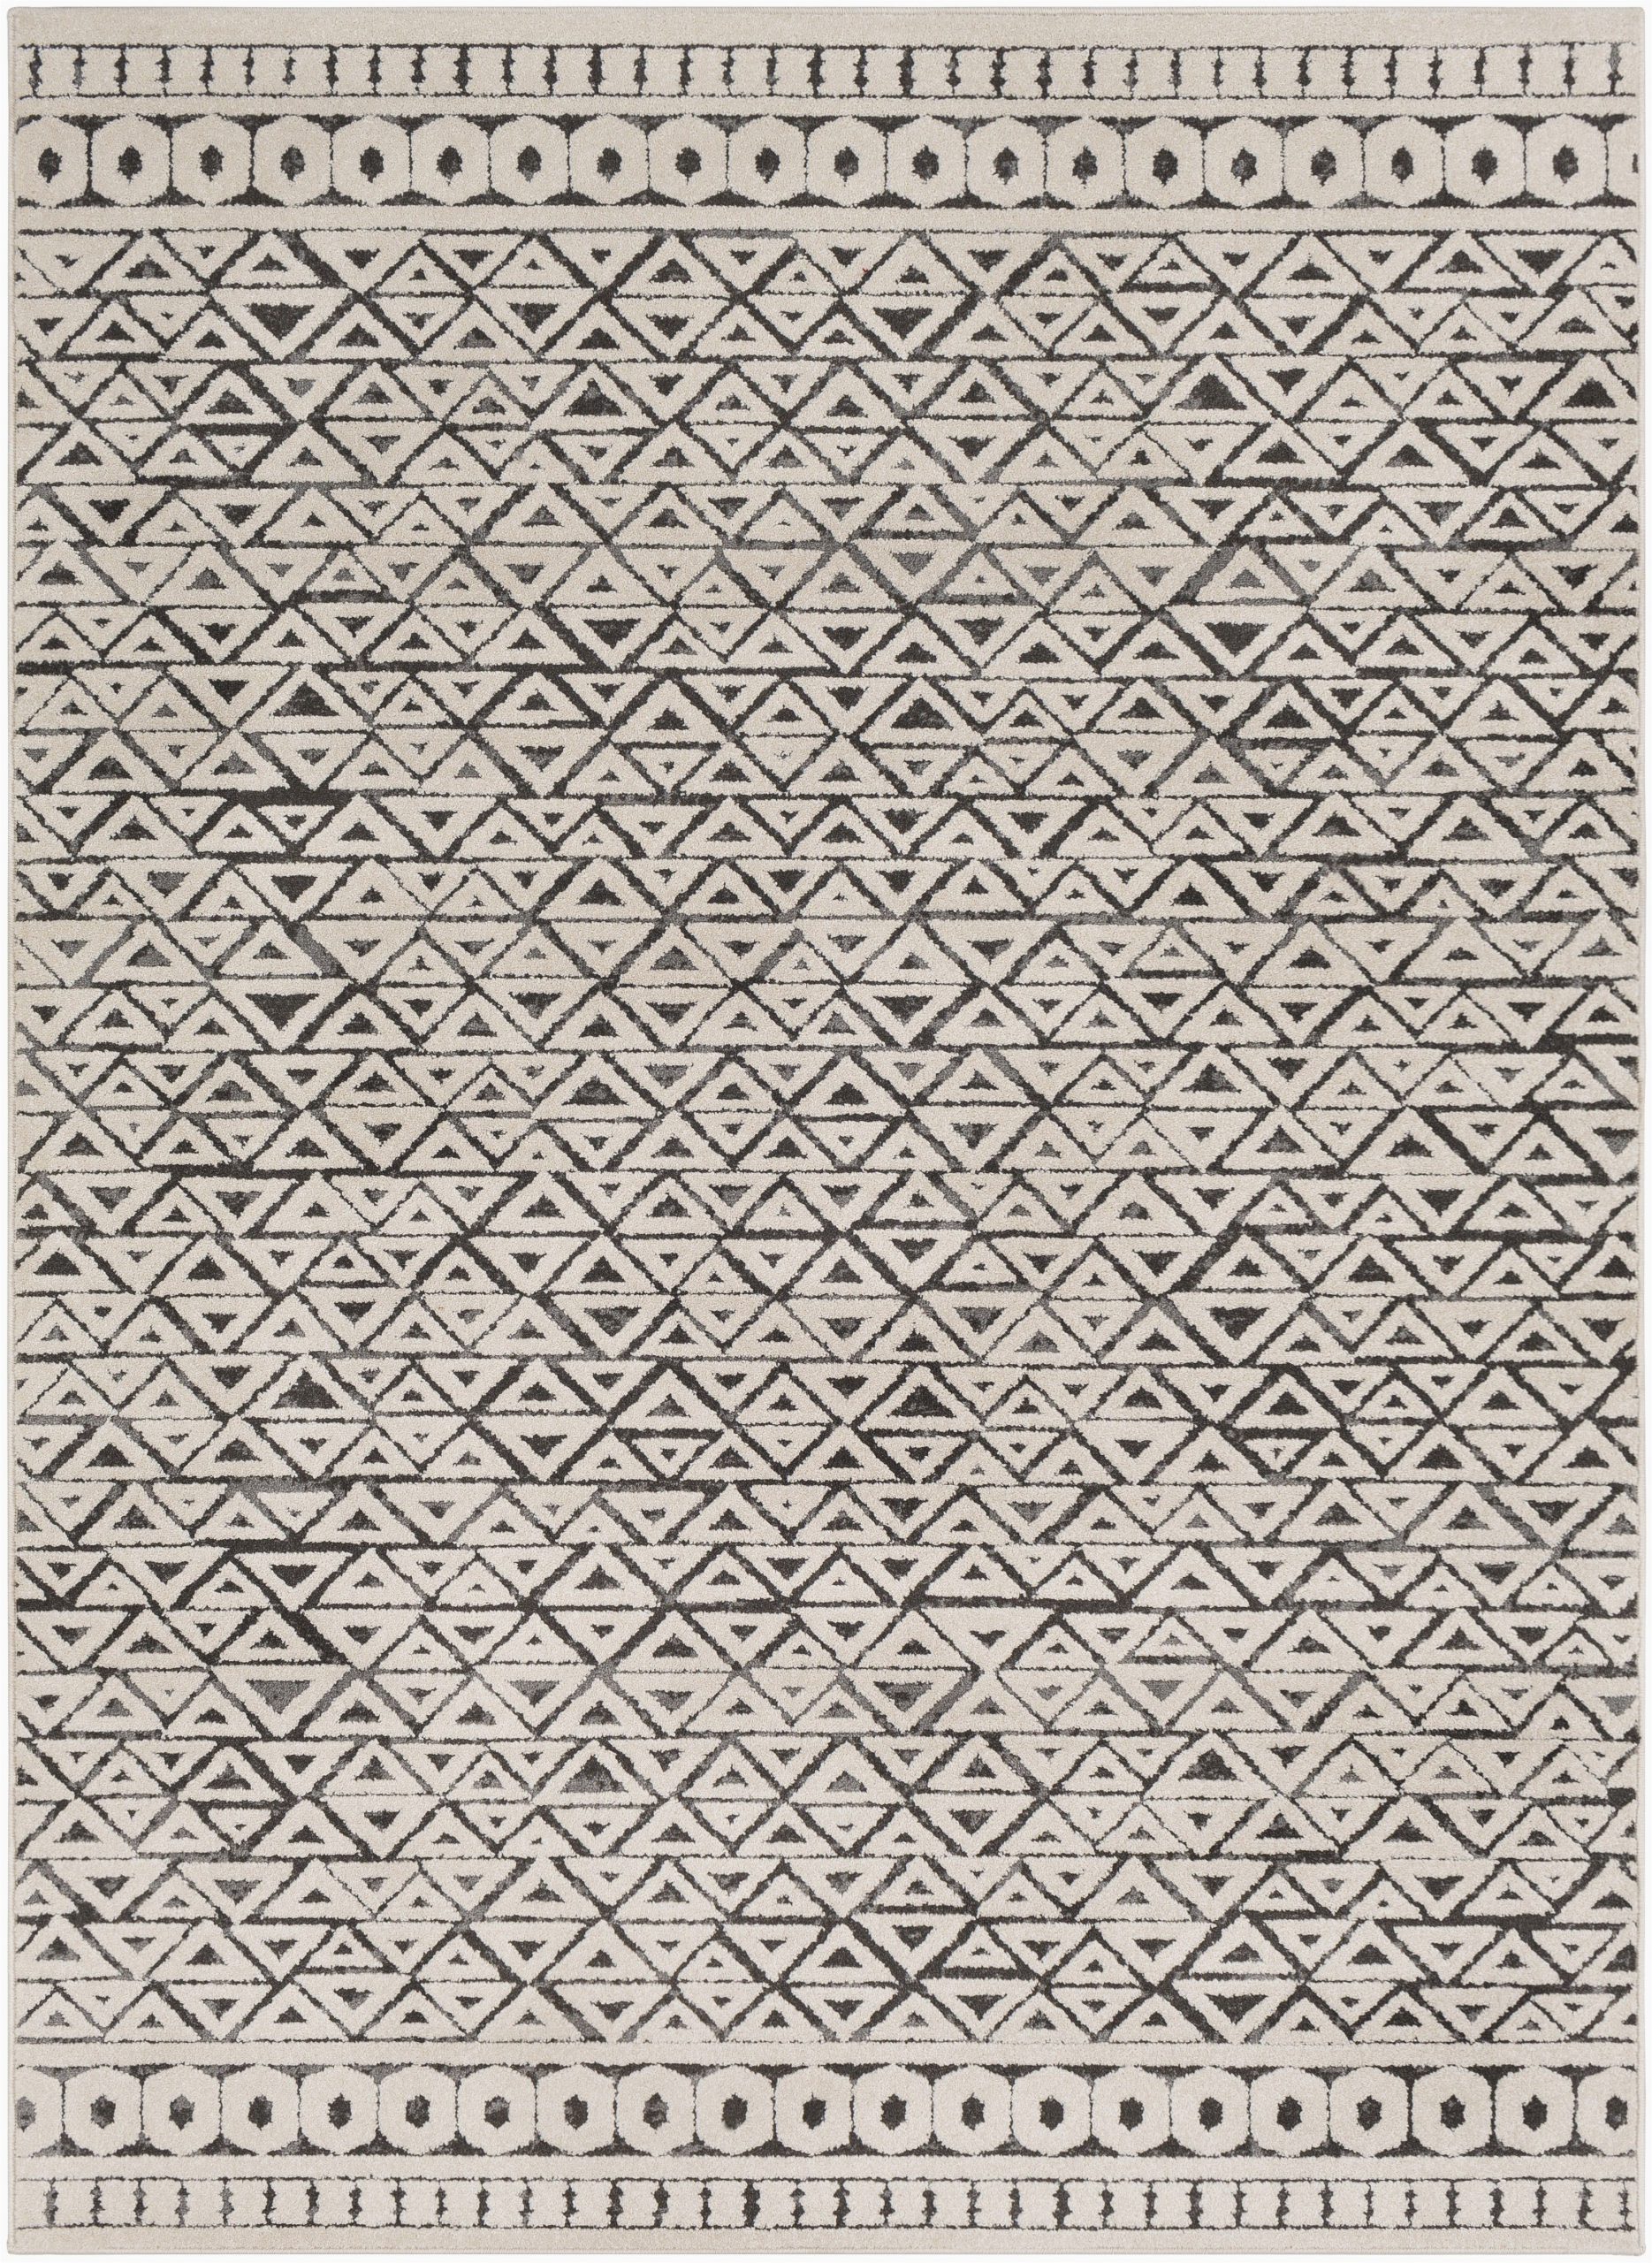 Elson Ivory Gray area Rug Variegated Triangles In Stripe formation Add A Playful Twist